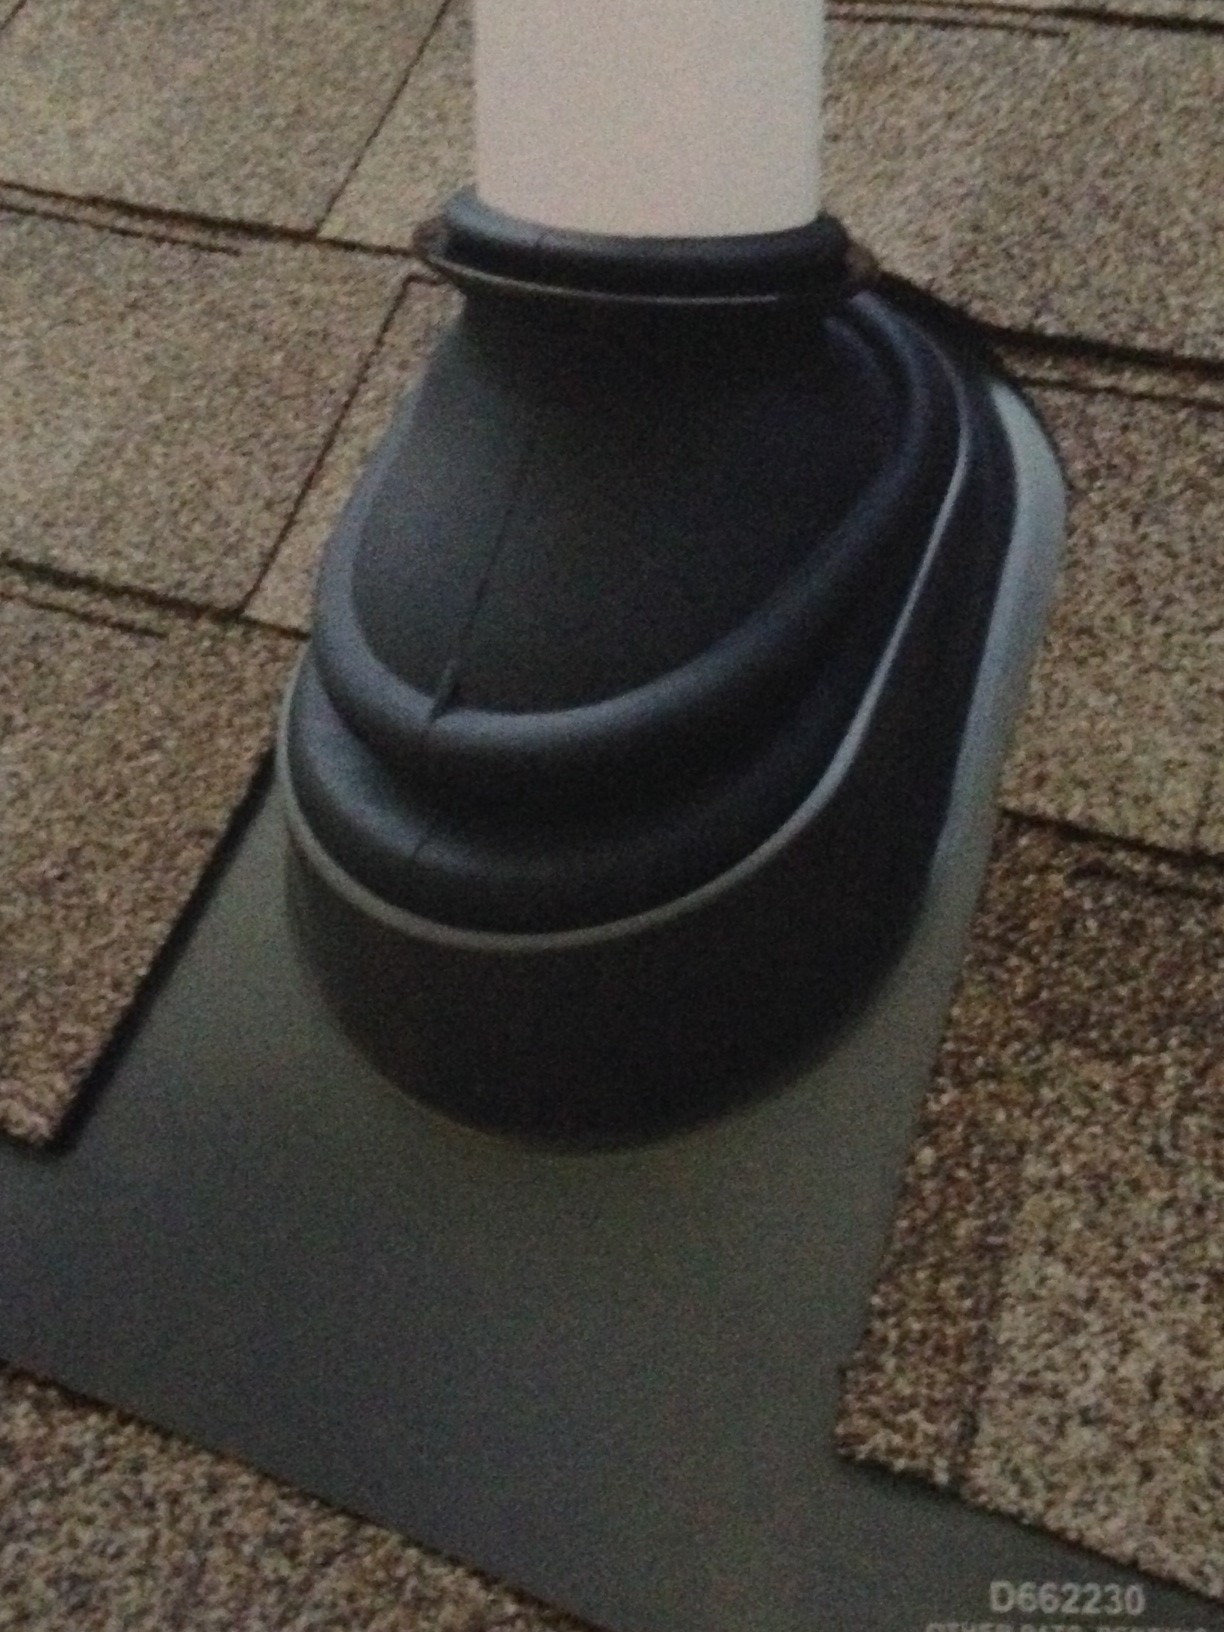 Ultimate Pipe Flashing from Lifetime Tool & Building Products LLC